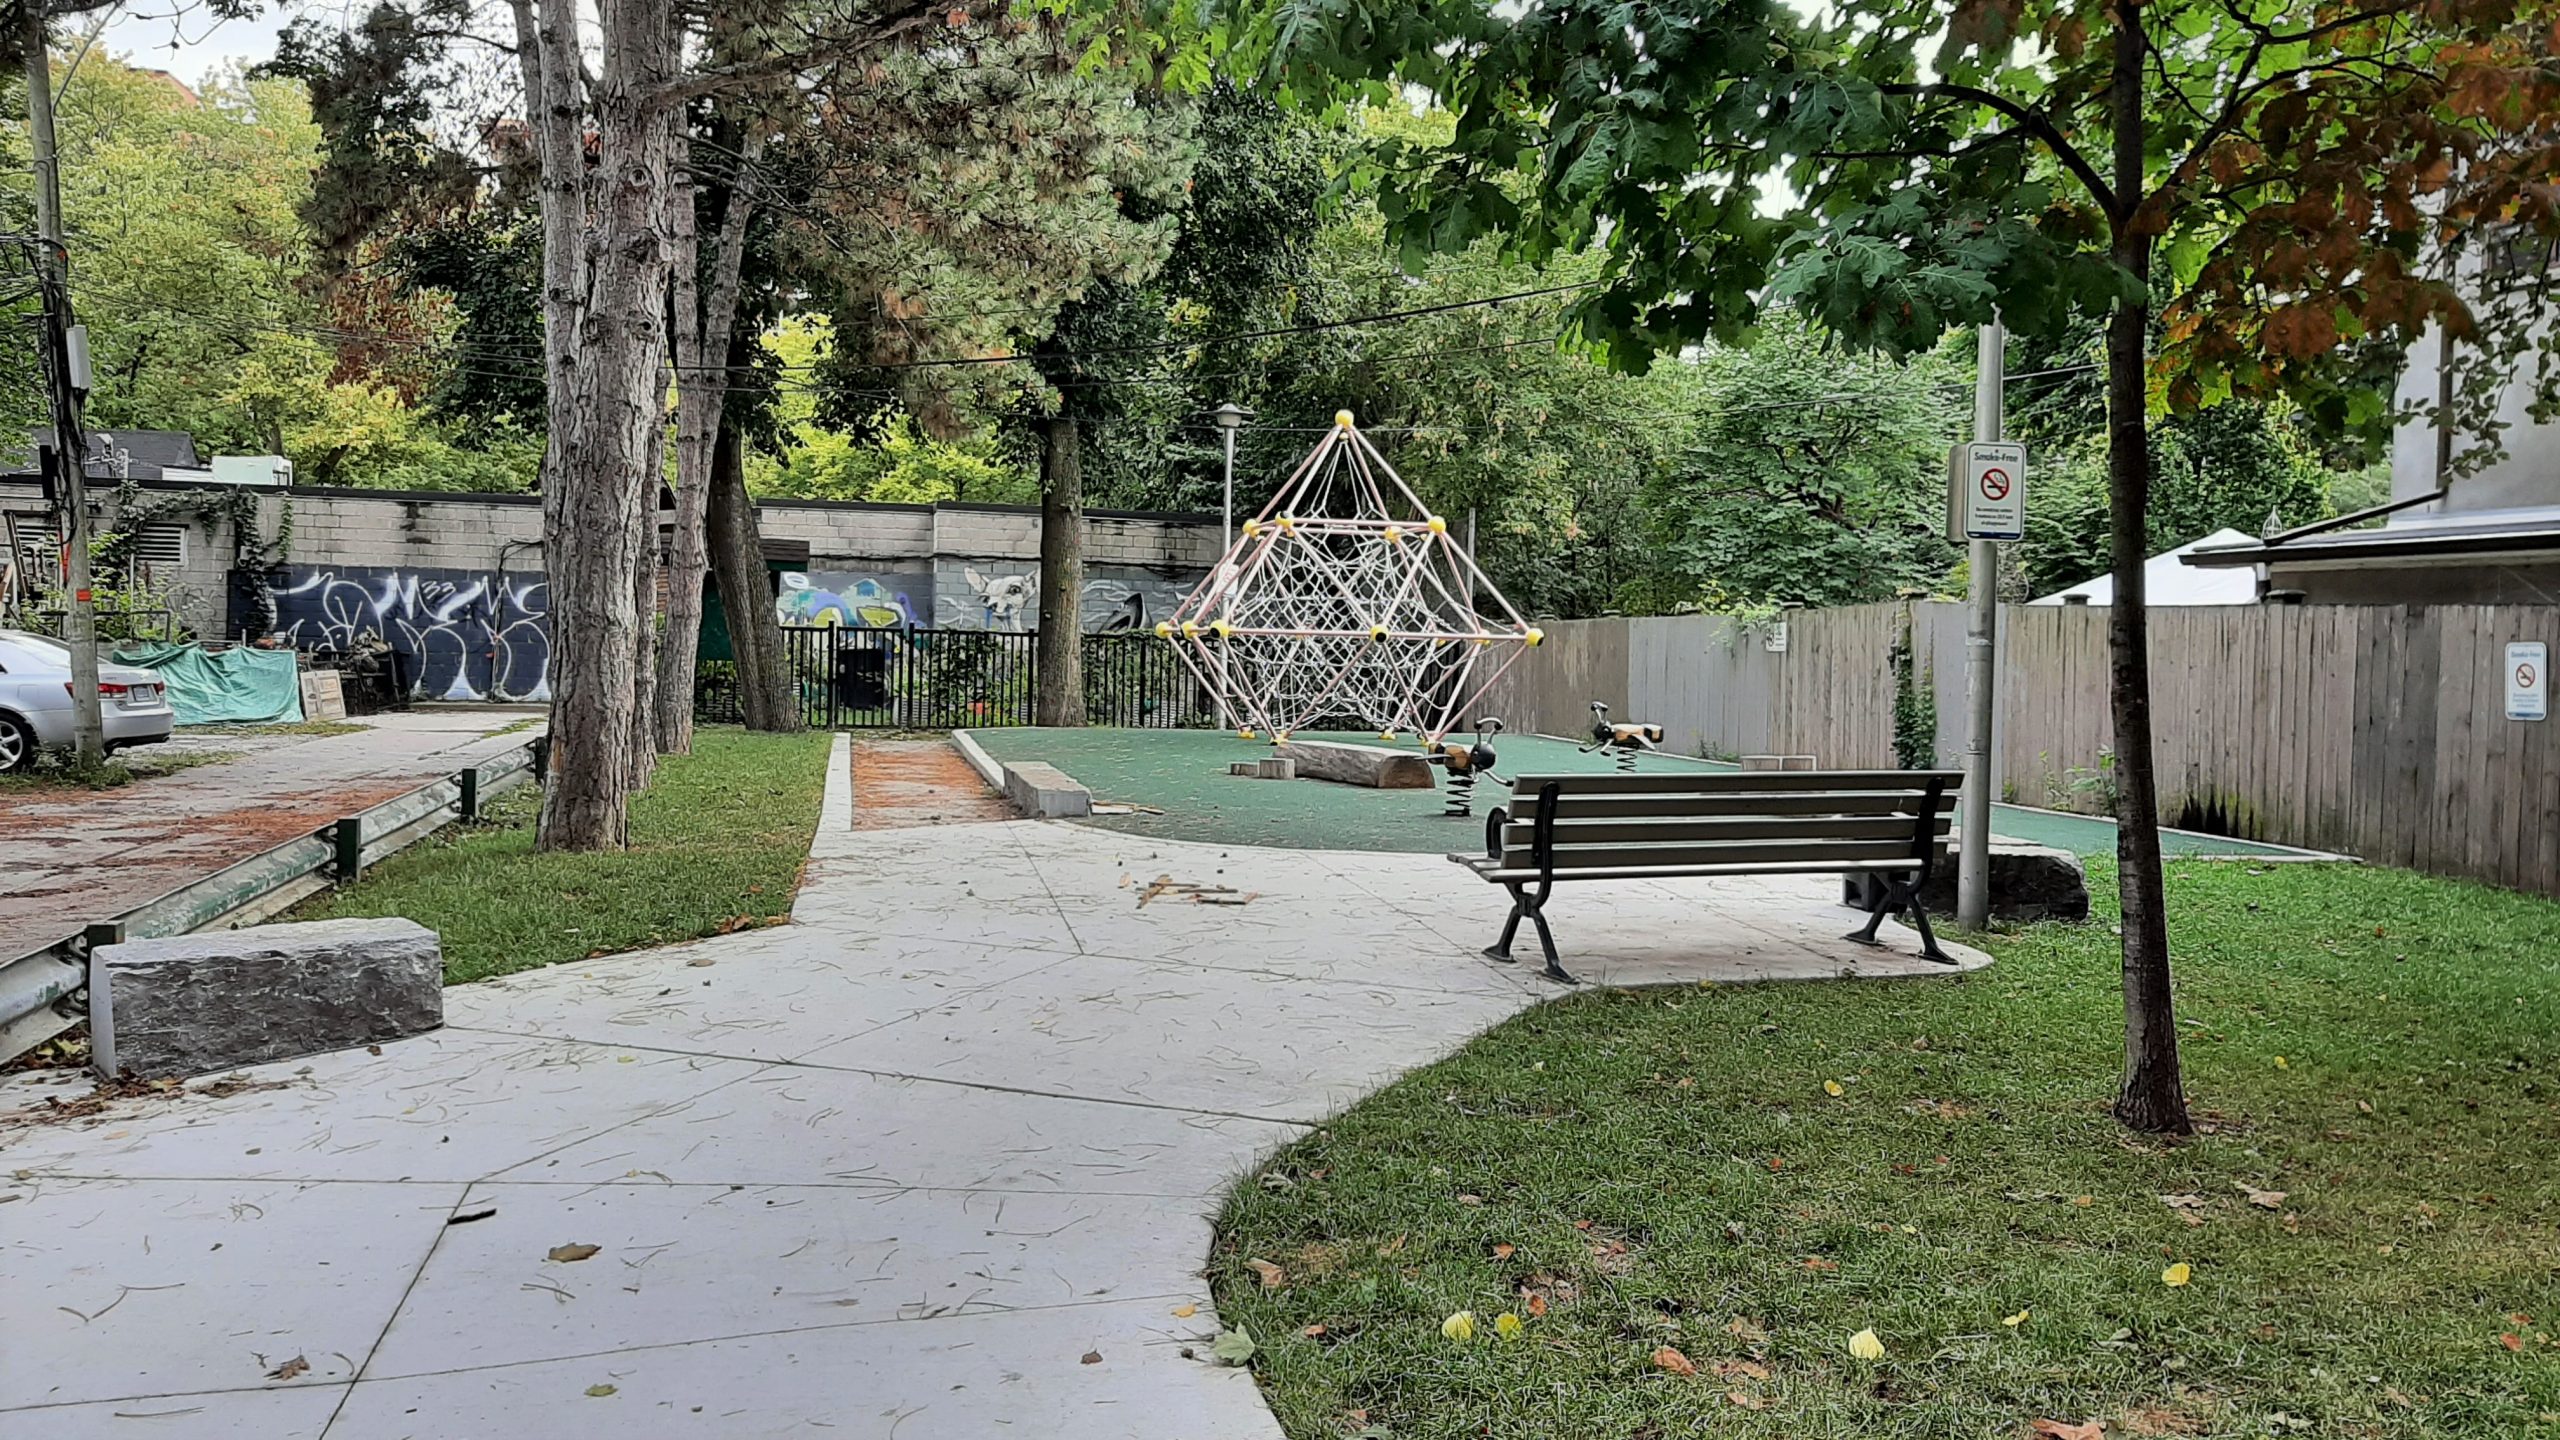 A photograph of Melbourne Avenue Parkette Playground after improvements, which shows a wide concrete path leading to the small playground area, with a bench and large geometric climbing structure in the centre. The playground also features two spring toys, a balance log, and green rubber surfacing.